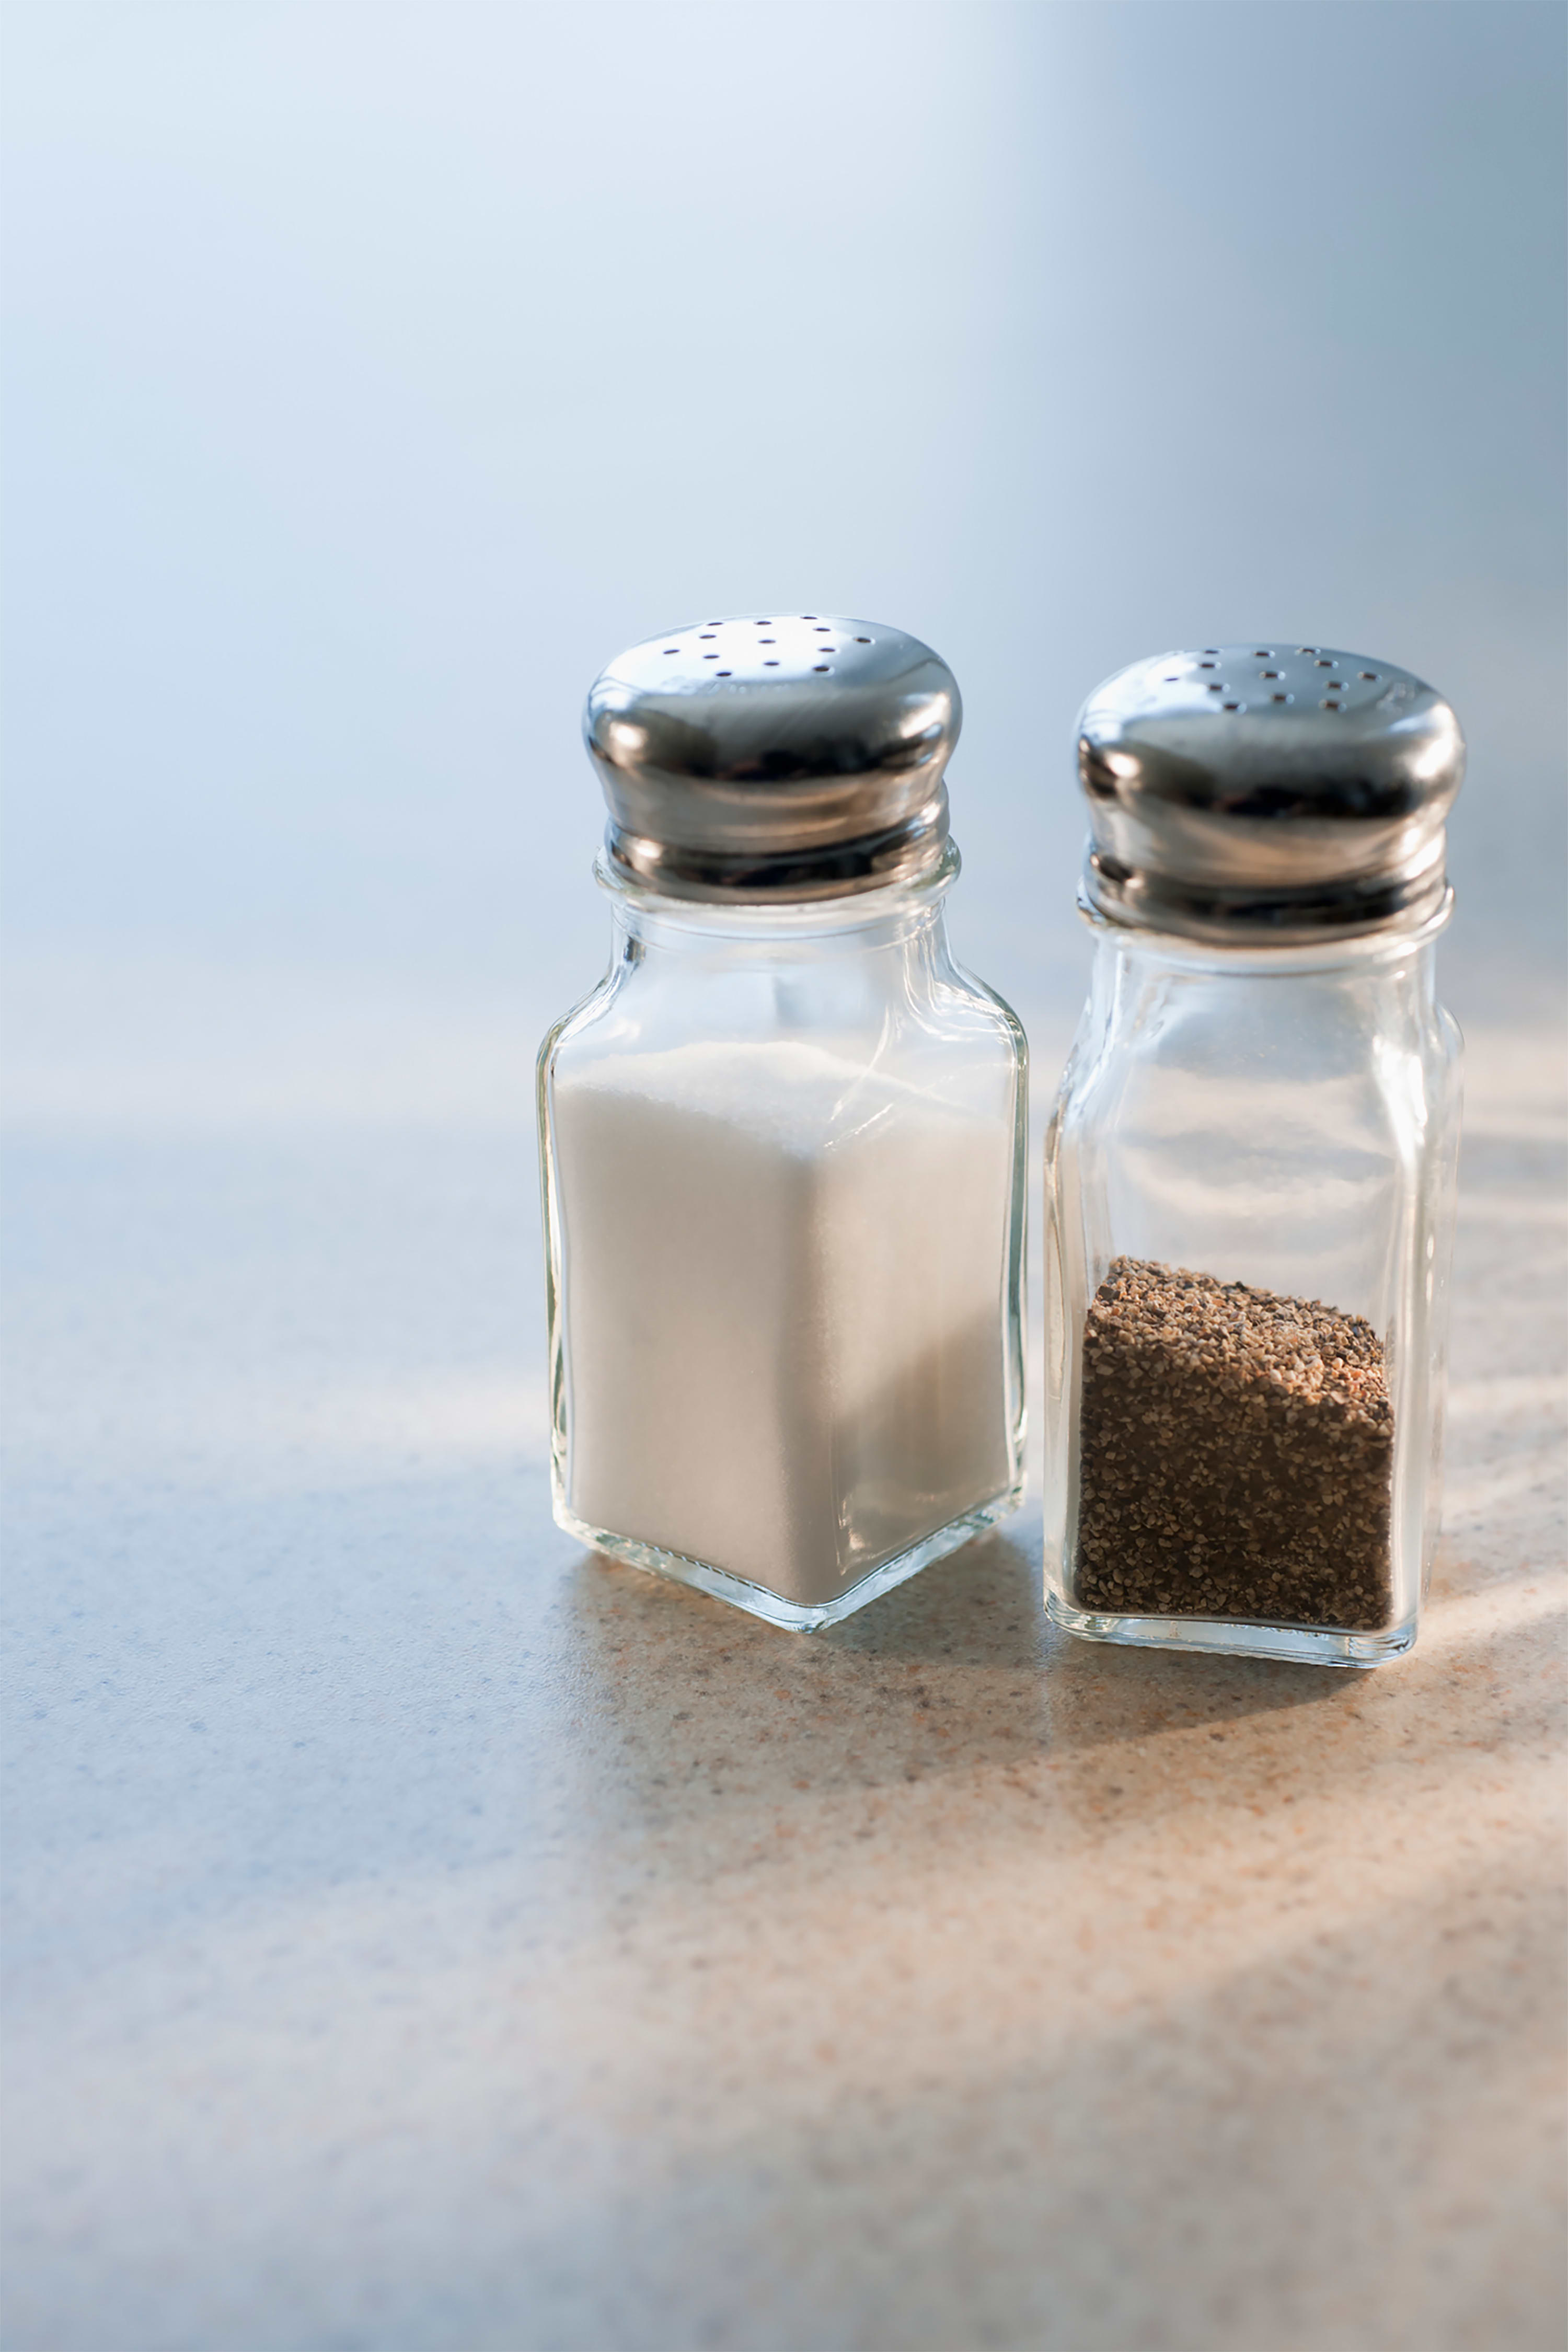 People Are Just Now Learning What Those Ridges On Salt Shakers Are